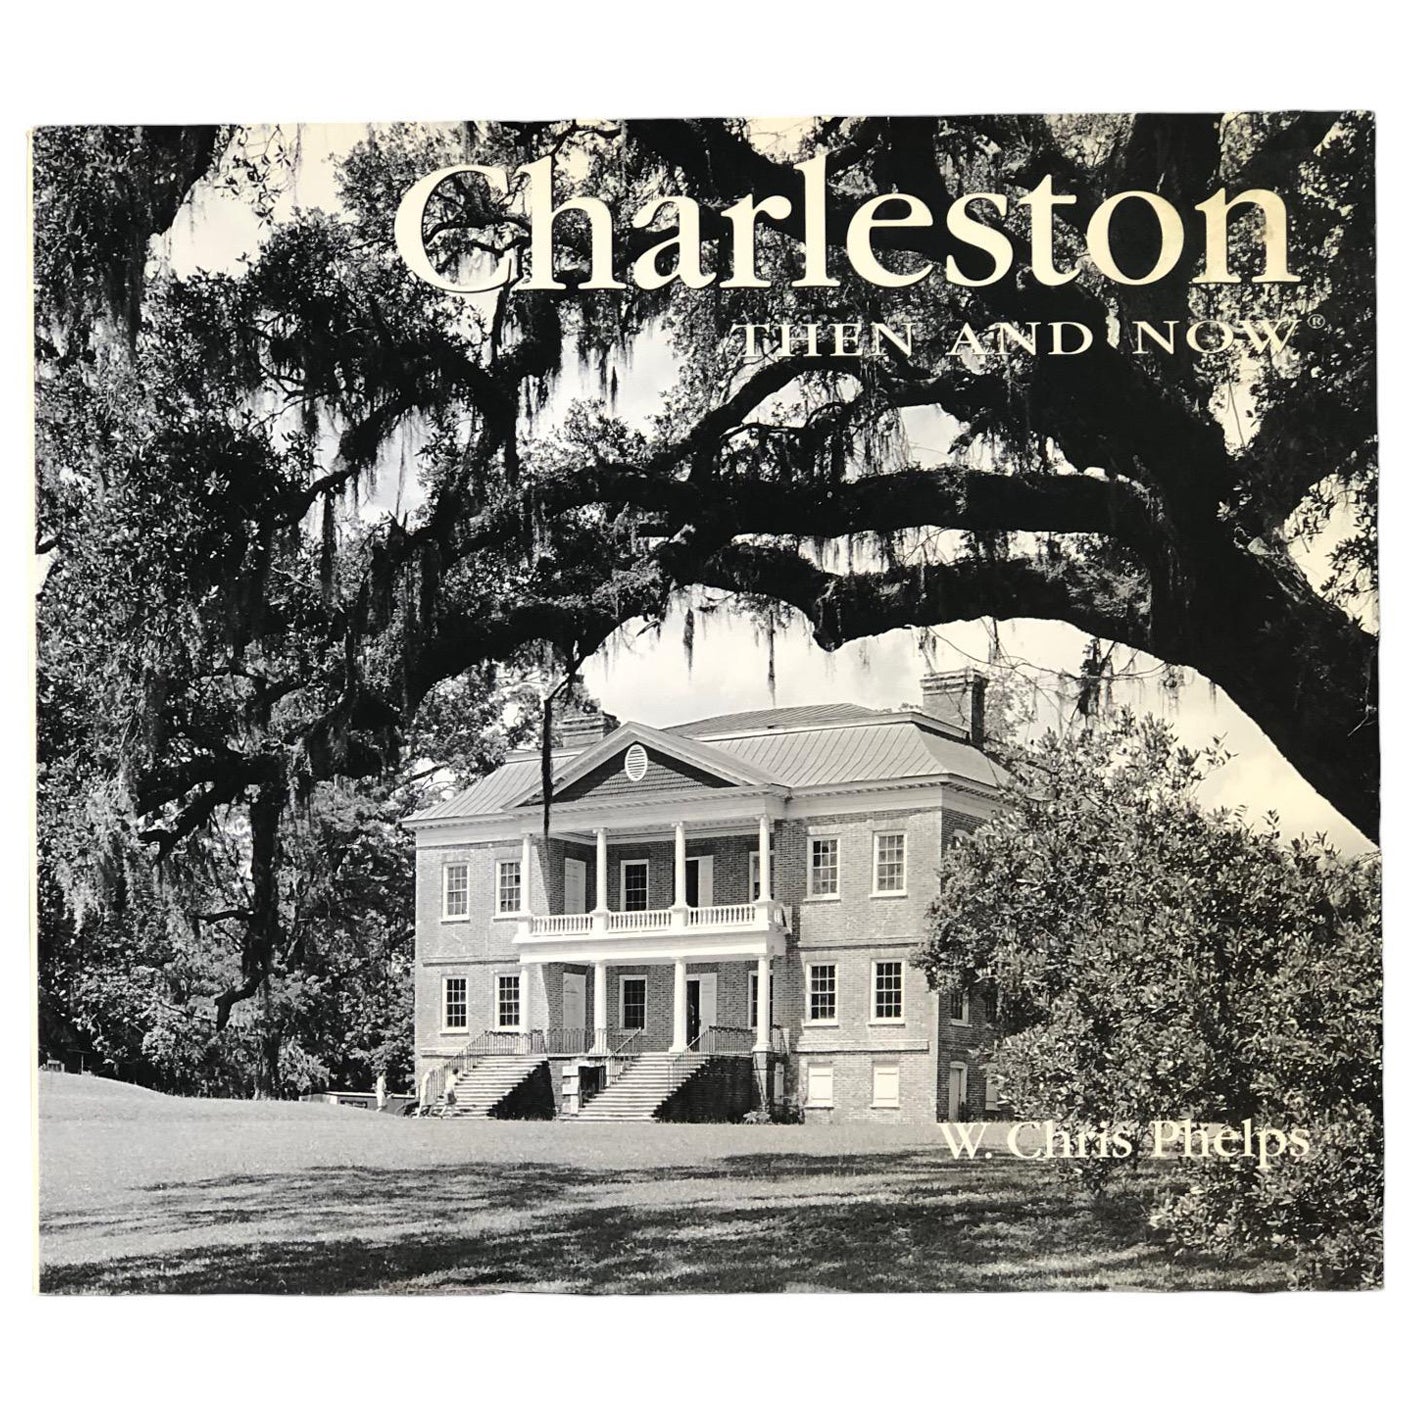 Charleston, Then and Now by W. Chris Phelps For Sale